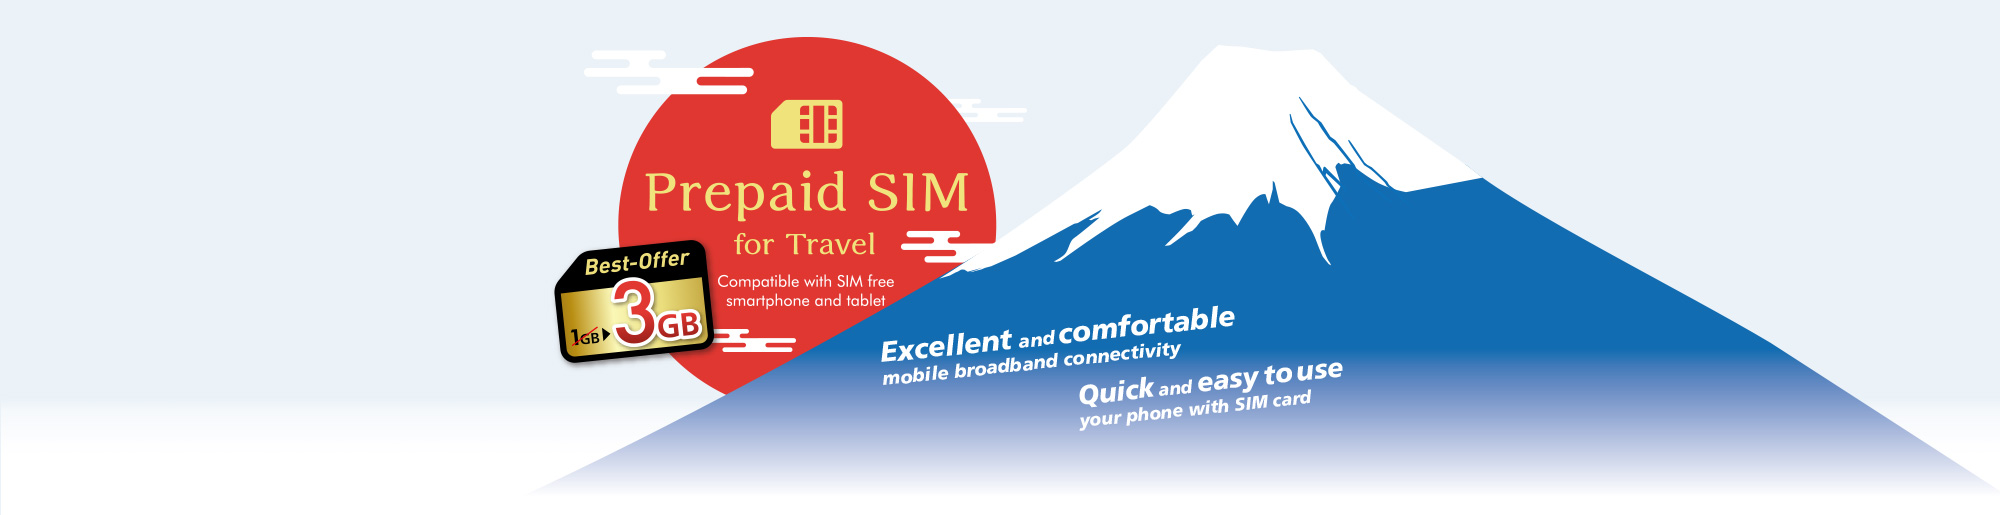 Prepaid SIM for Travel - Compatible with SIM free smartphone and tablet - Best Offer 1GB→3GB - Excellent and comfortable mobile broadband connectivity - Quick and easy to use your phone with SIM card